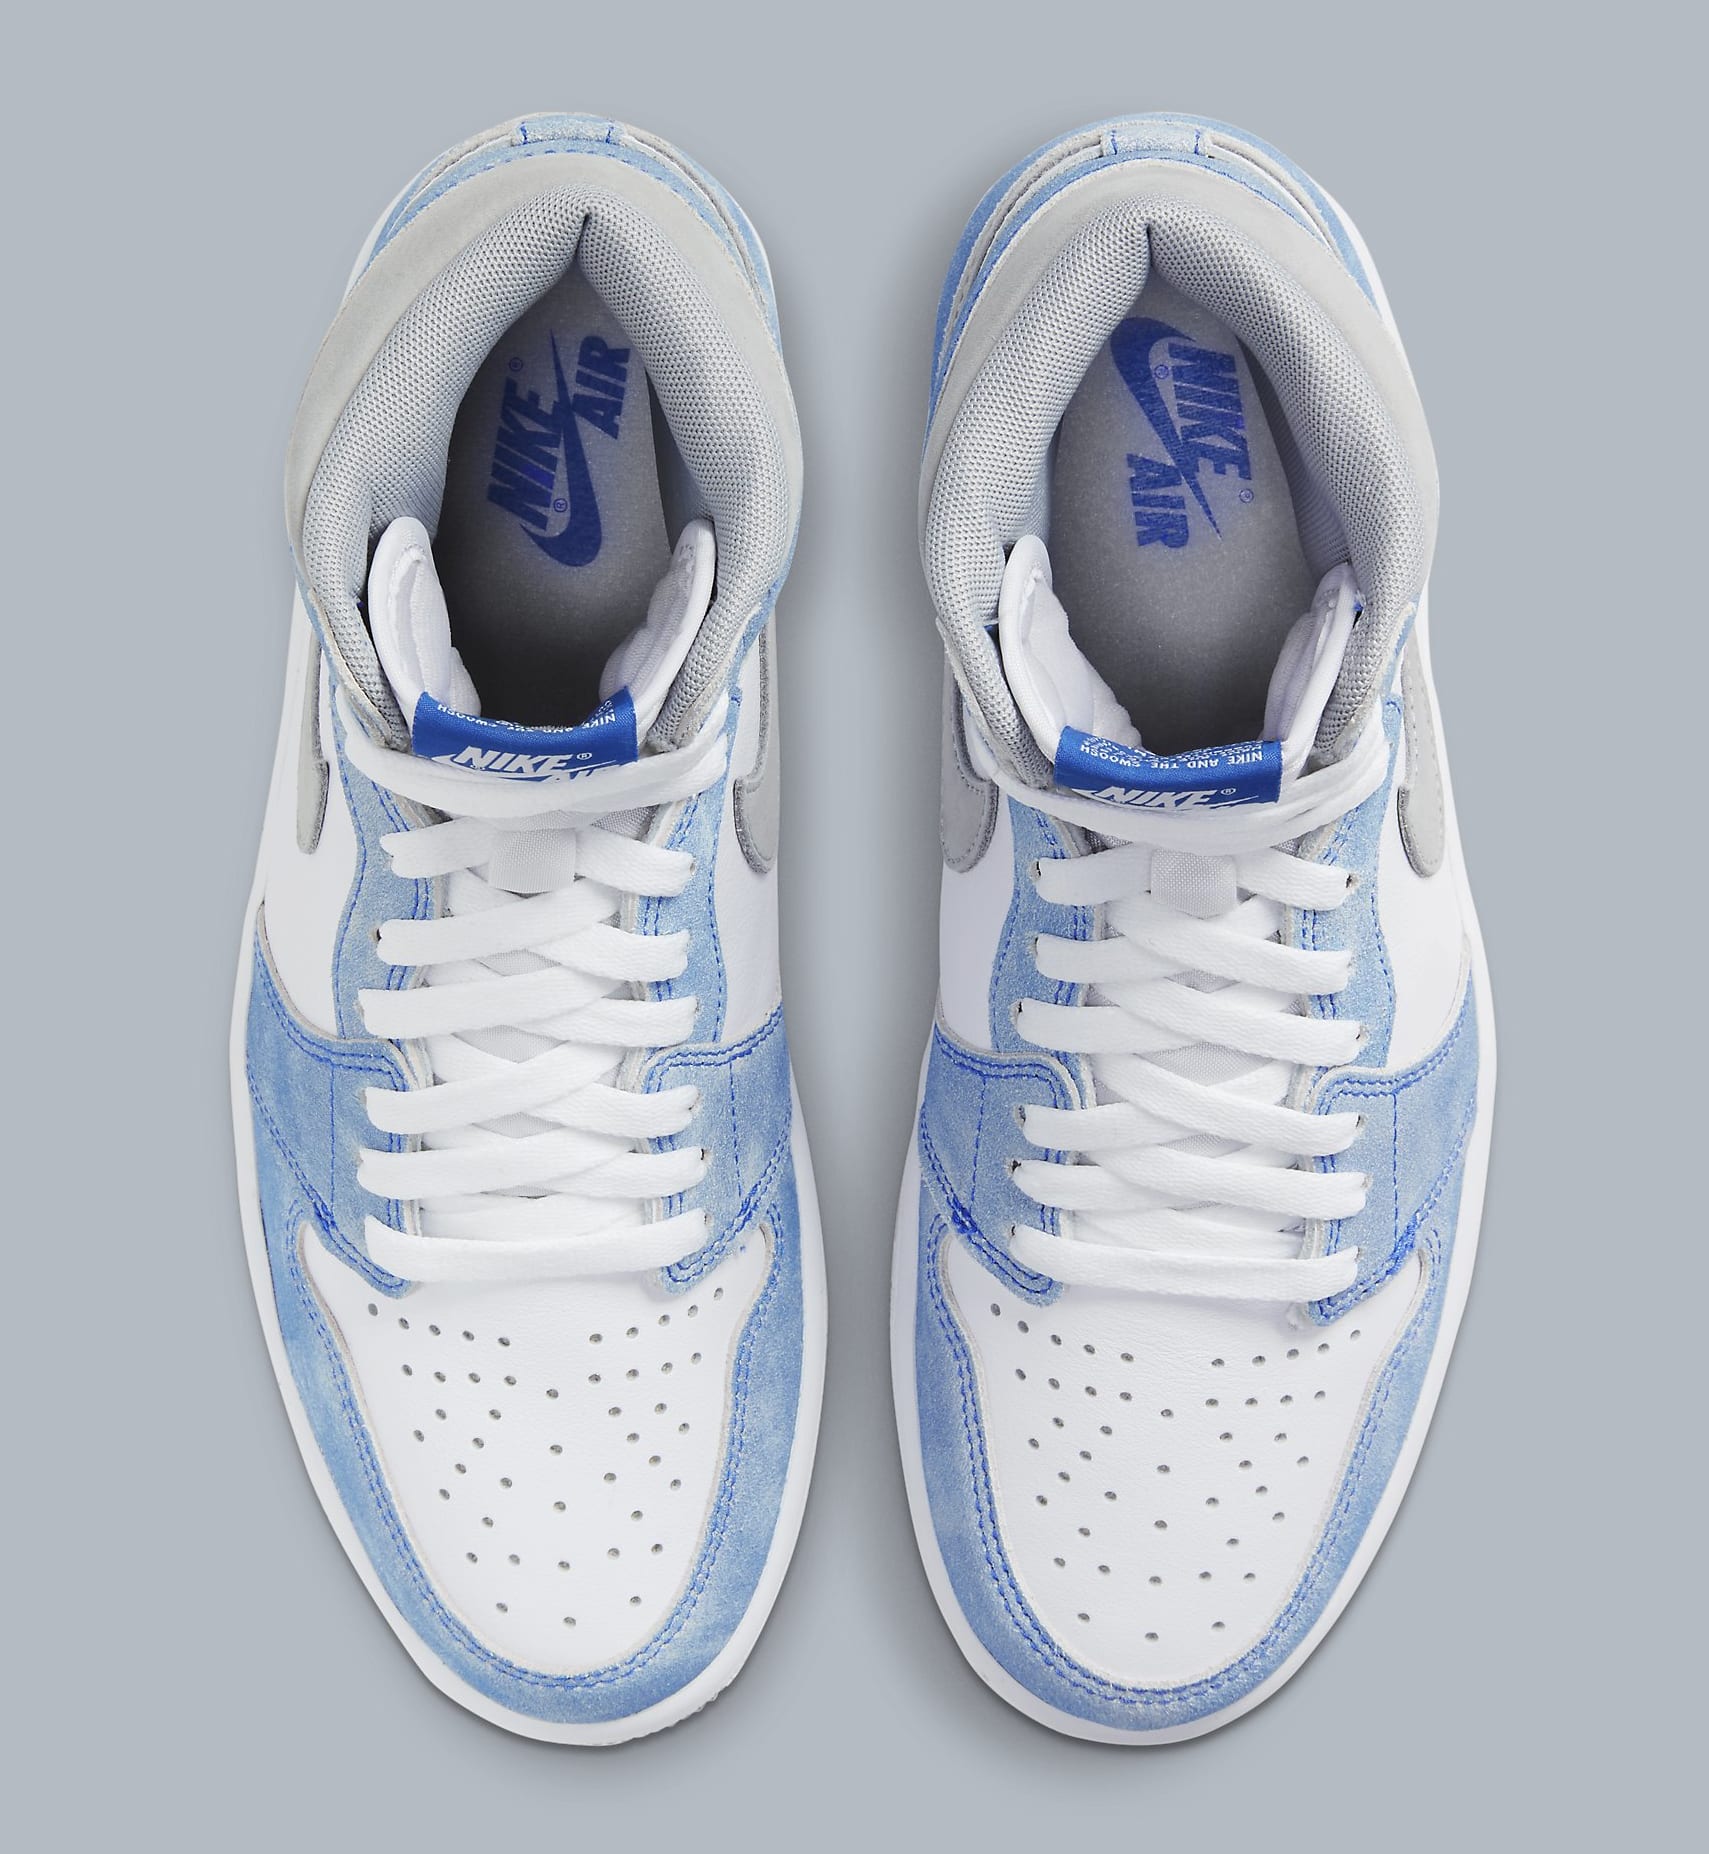 The 'Hyper Royal' Air Jordan 1 High Is Dropping This Month   Complex